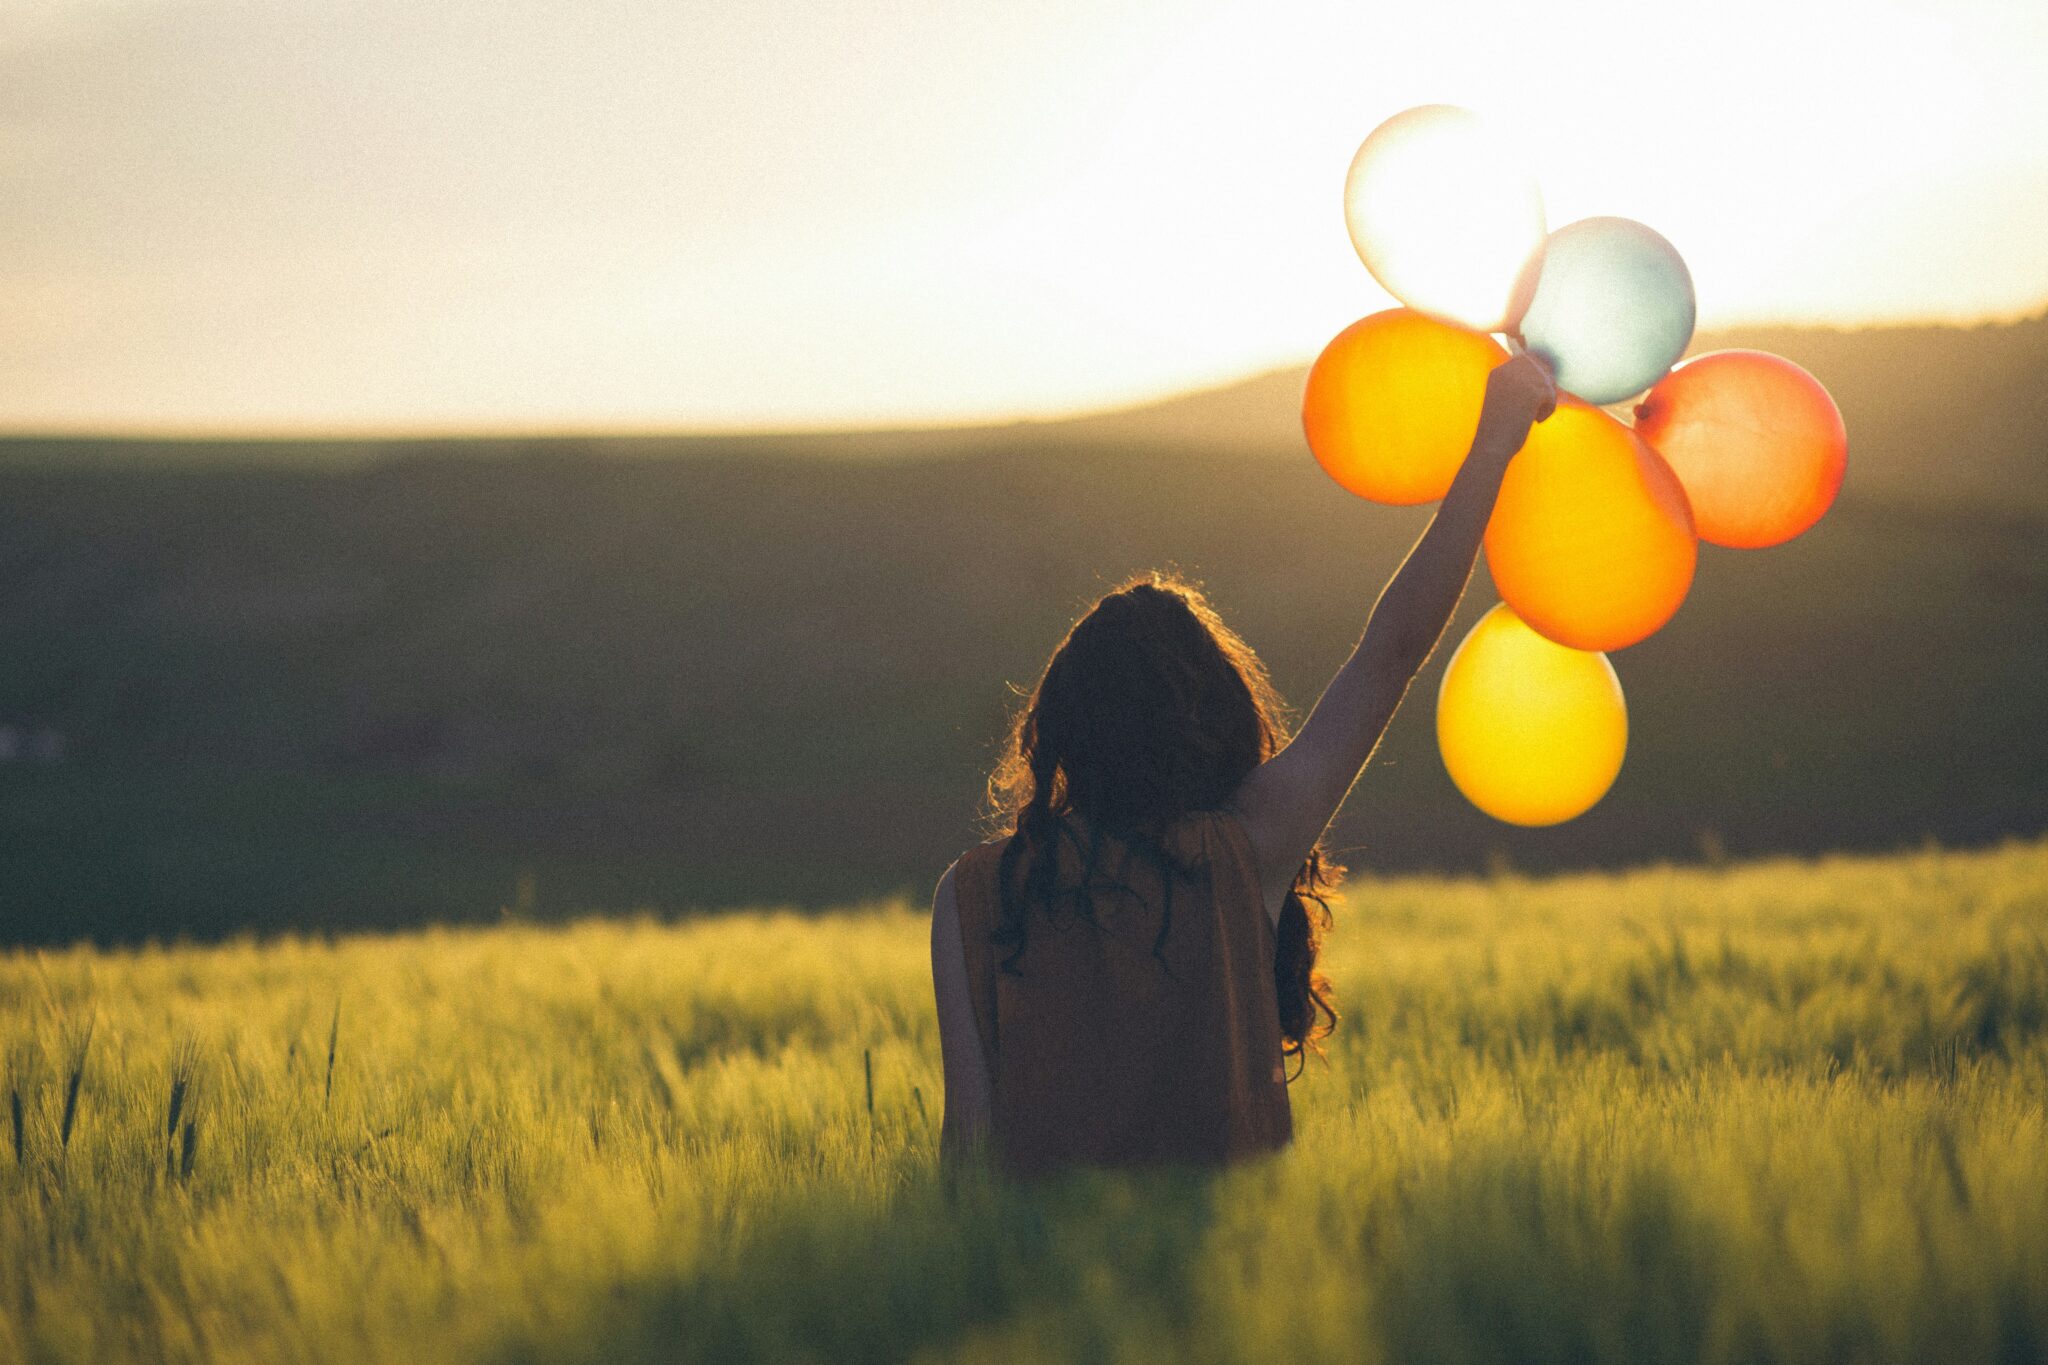 woman holding balloons | Photo by Catalin Pop on Unsplash